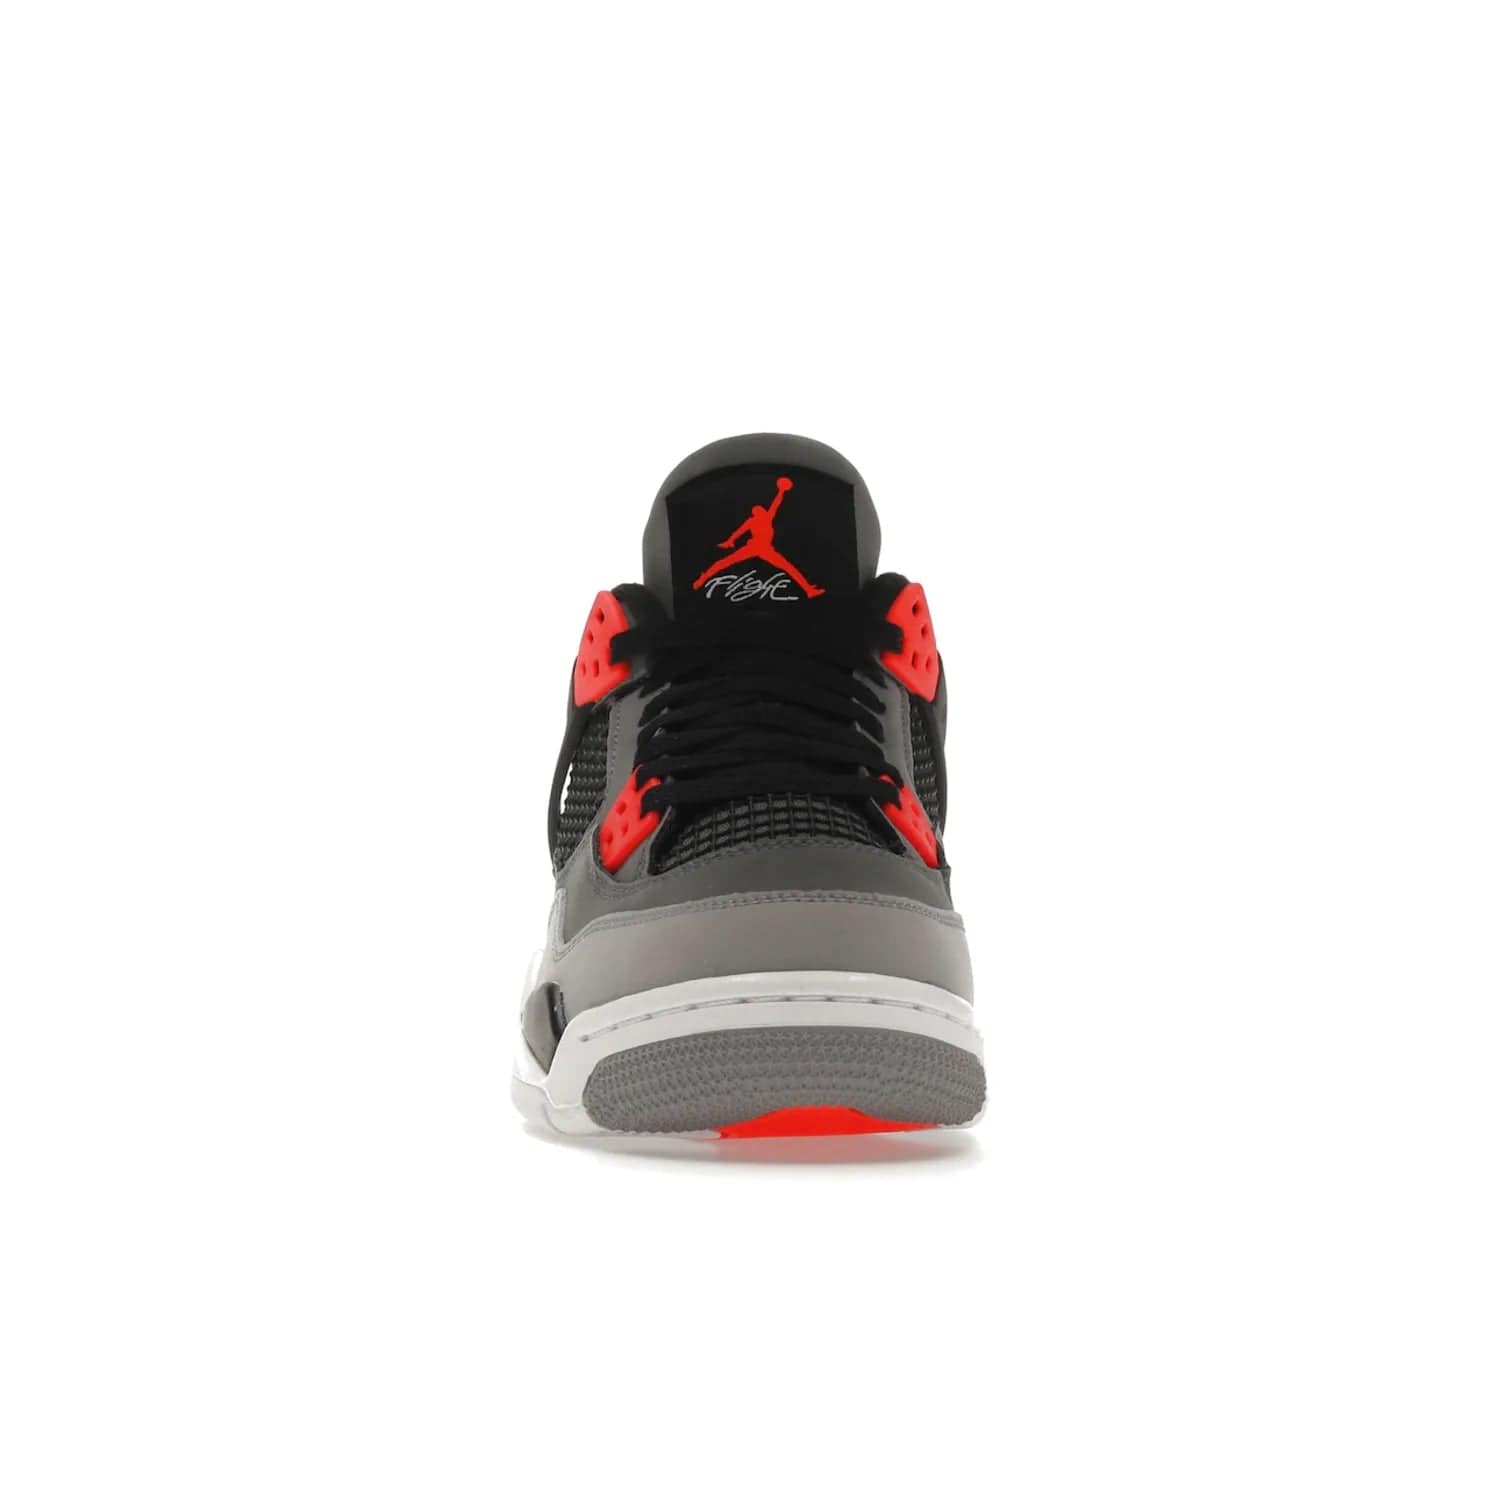 Jordan 4 Retro Infrared (GS) - Image 10 - Only at www.BallersClubKickz.com - Shop the Air Jordan 4 Retro Infrared (GS) for a classic silhouette with subtle yet bold features. Dark grey nubuck upper with lighter forefoot overlay, black accents, Infrared molded eyelets & woven tongue tag. Available June 2022.